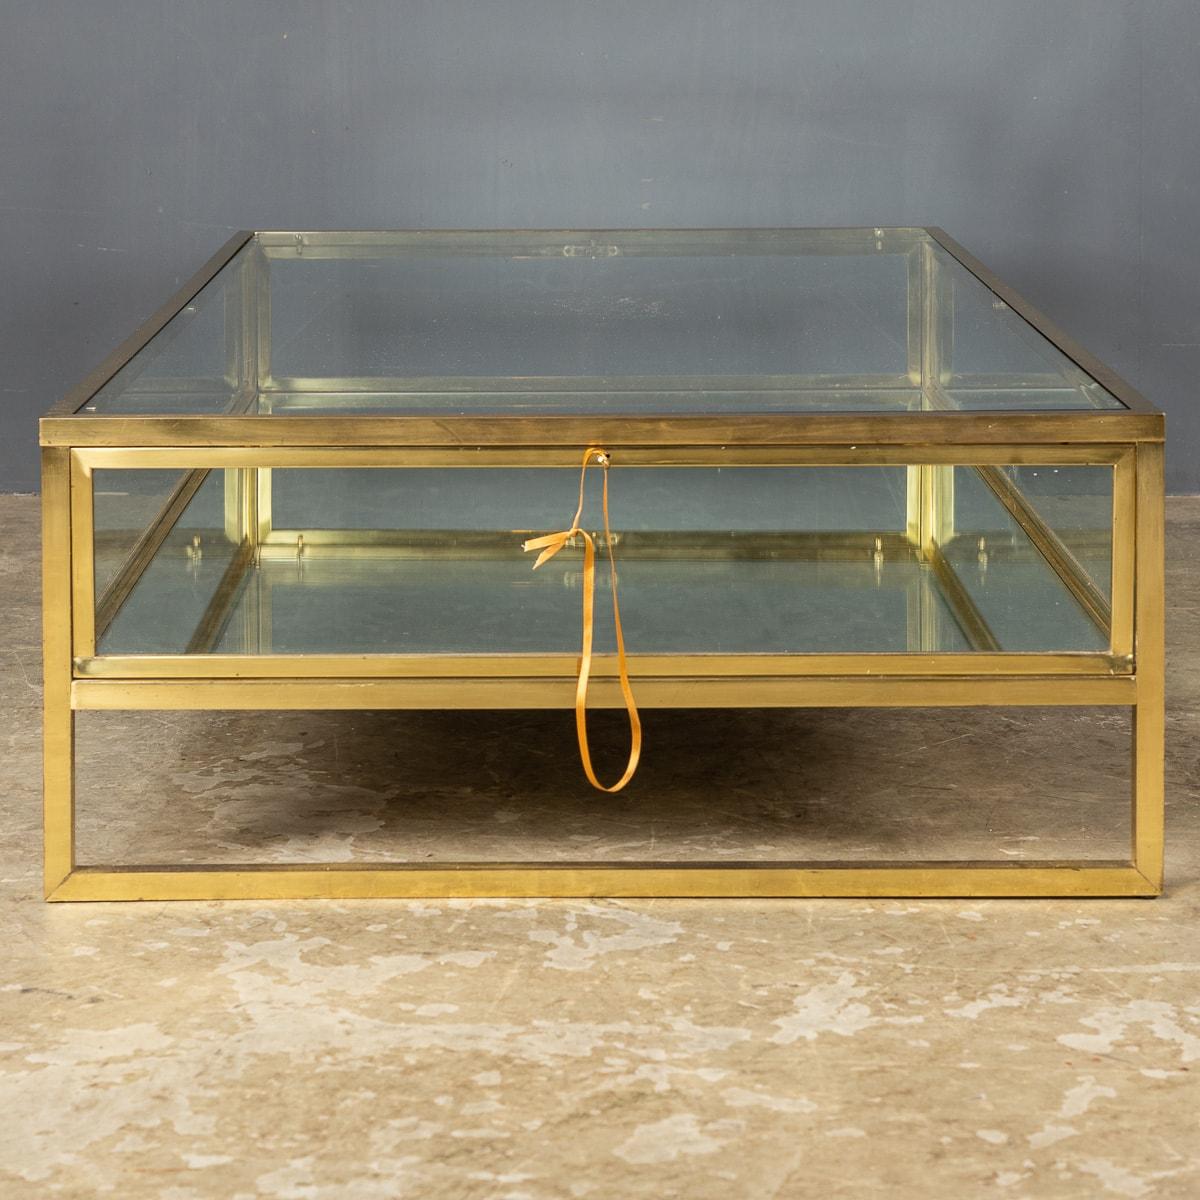 20th Century Brass & Glass Mirrored Vitrine Coffee Table, c.1970 For Sale 1